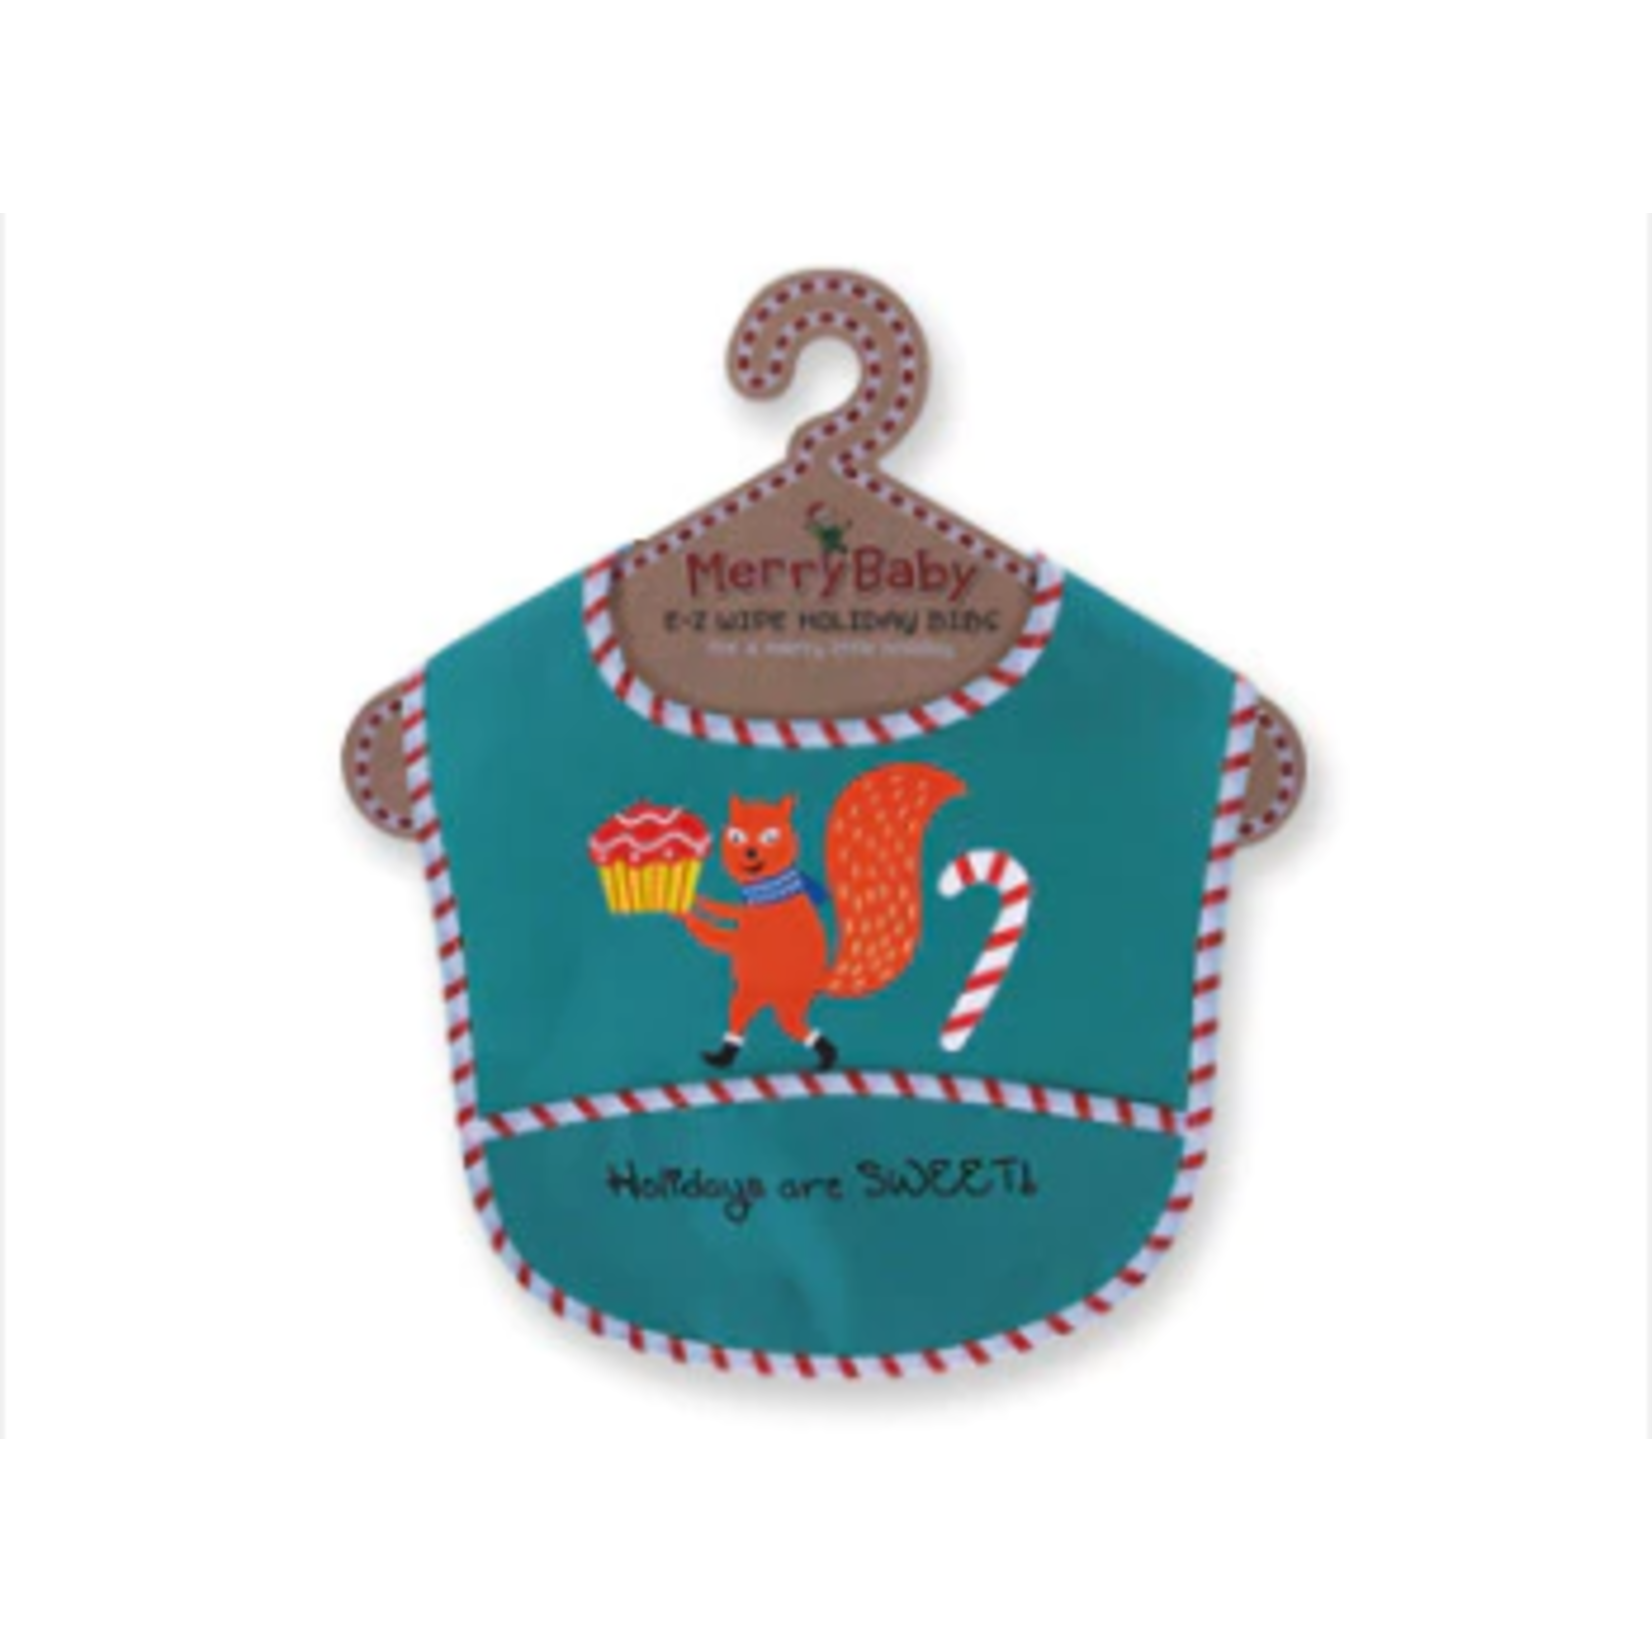 DM Merchandise Merry Baby E-Z Wipe Holiday Bibs Holidays are Sweet